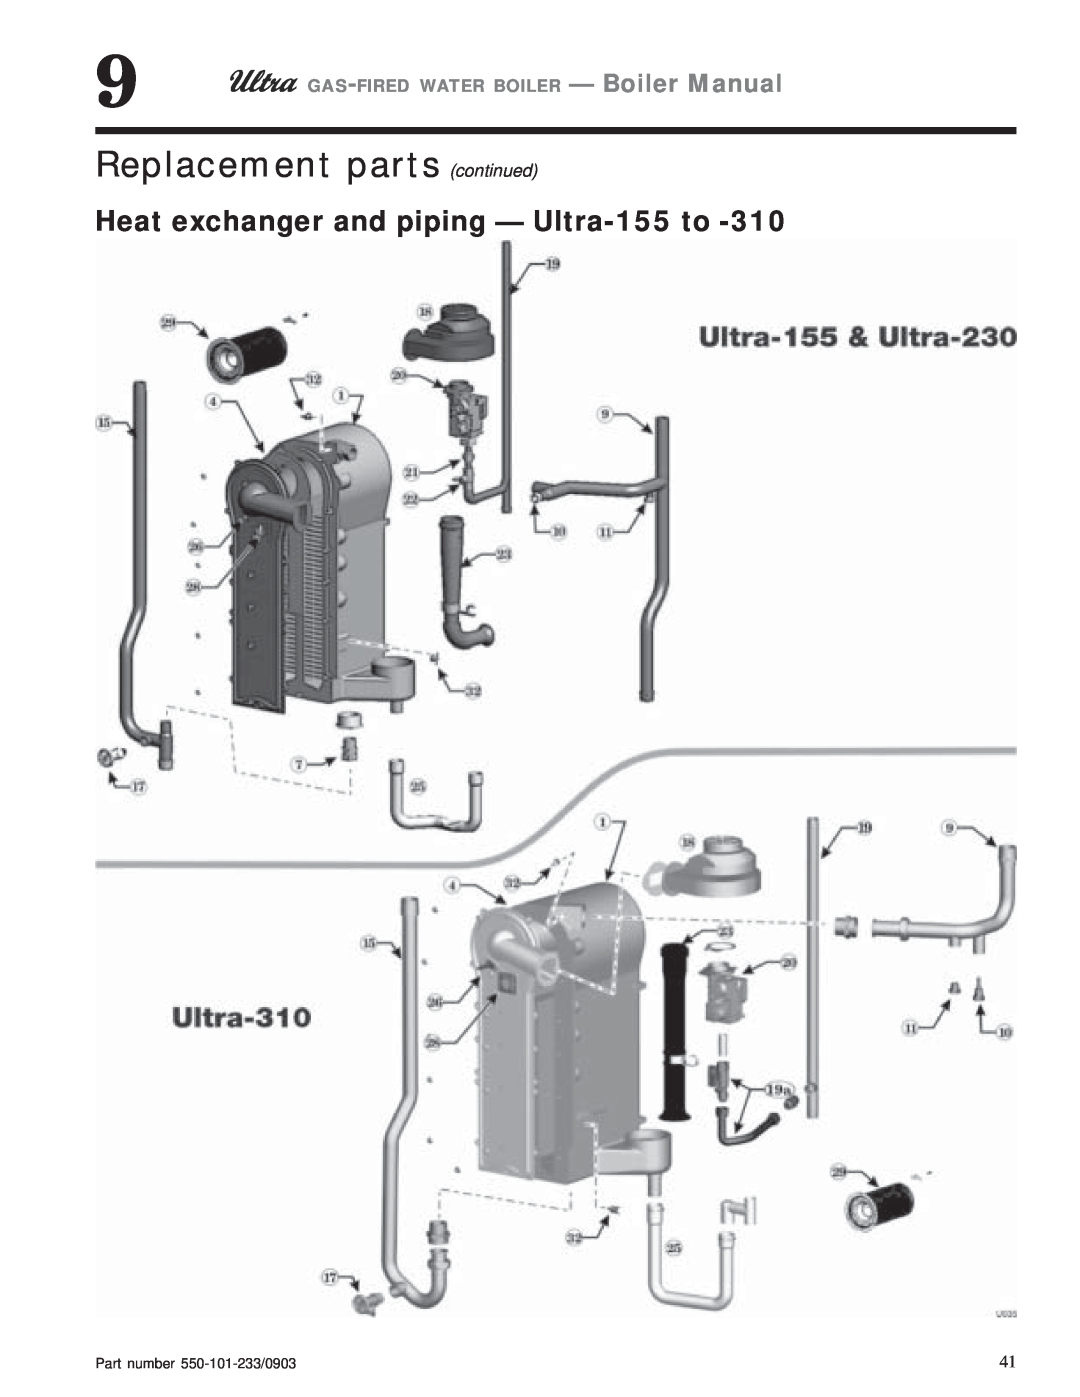 Weil-McLain 230, 80, 310, 105 manual Replacement parts continued, Heat exchanger and piping - Ultra-155 to 